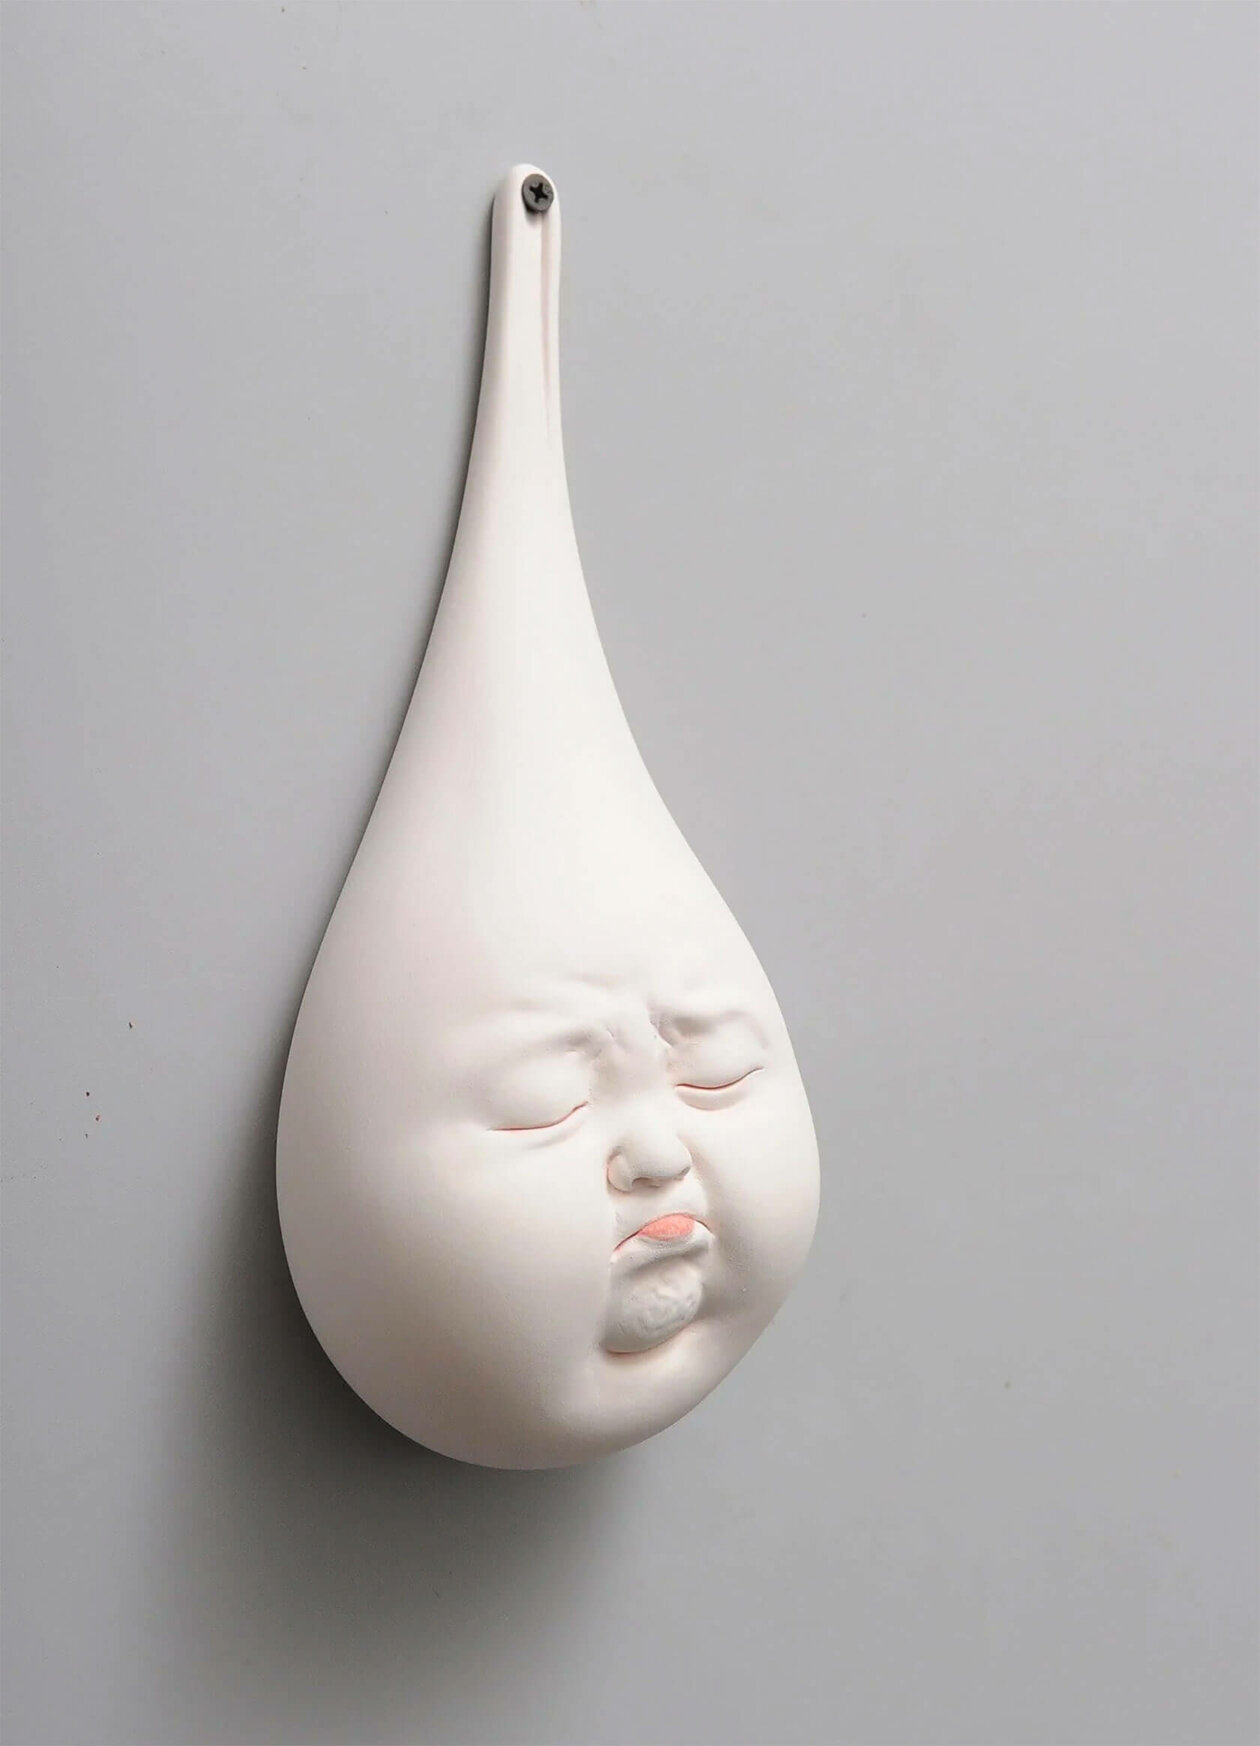 Distorted Baby Faces, Surreal Ceramic Sculptures By Johnson Tsang (19)